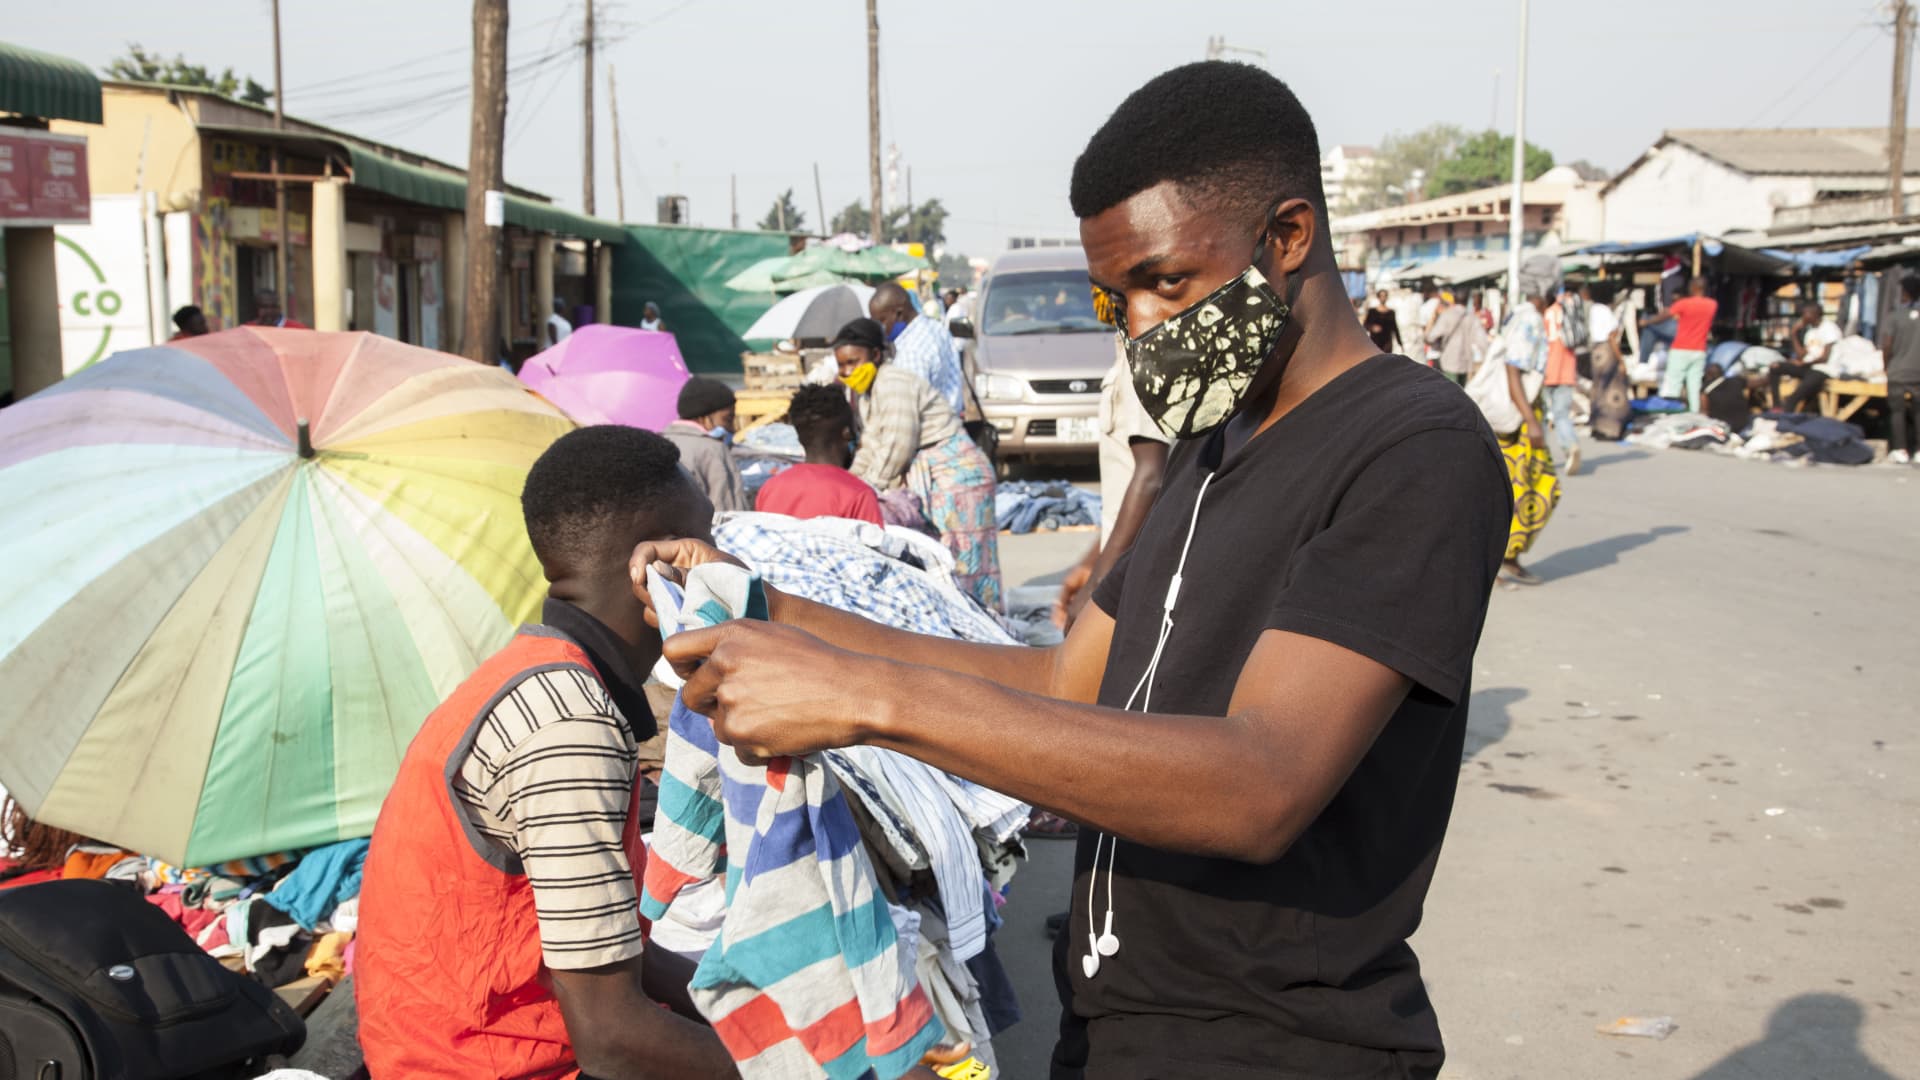 A man wearing a face mask selects clothes at a market in Lusaka, capital of Zambia, on Aug. 18, 2020. Zambia's confirmed COVID-19 cases have continued rising, with the total number close to the 10,000 mark.